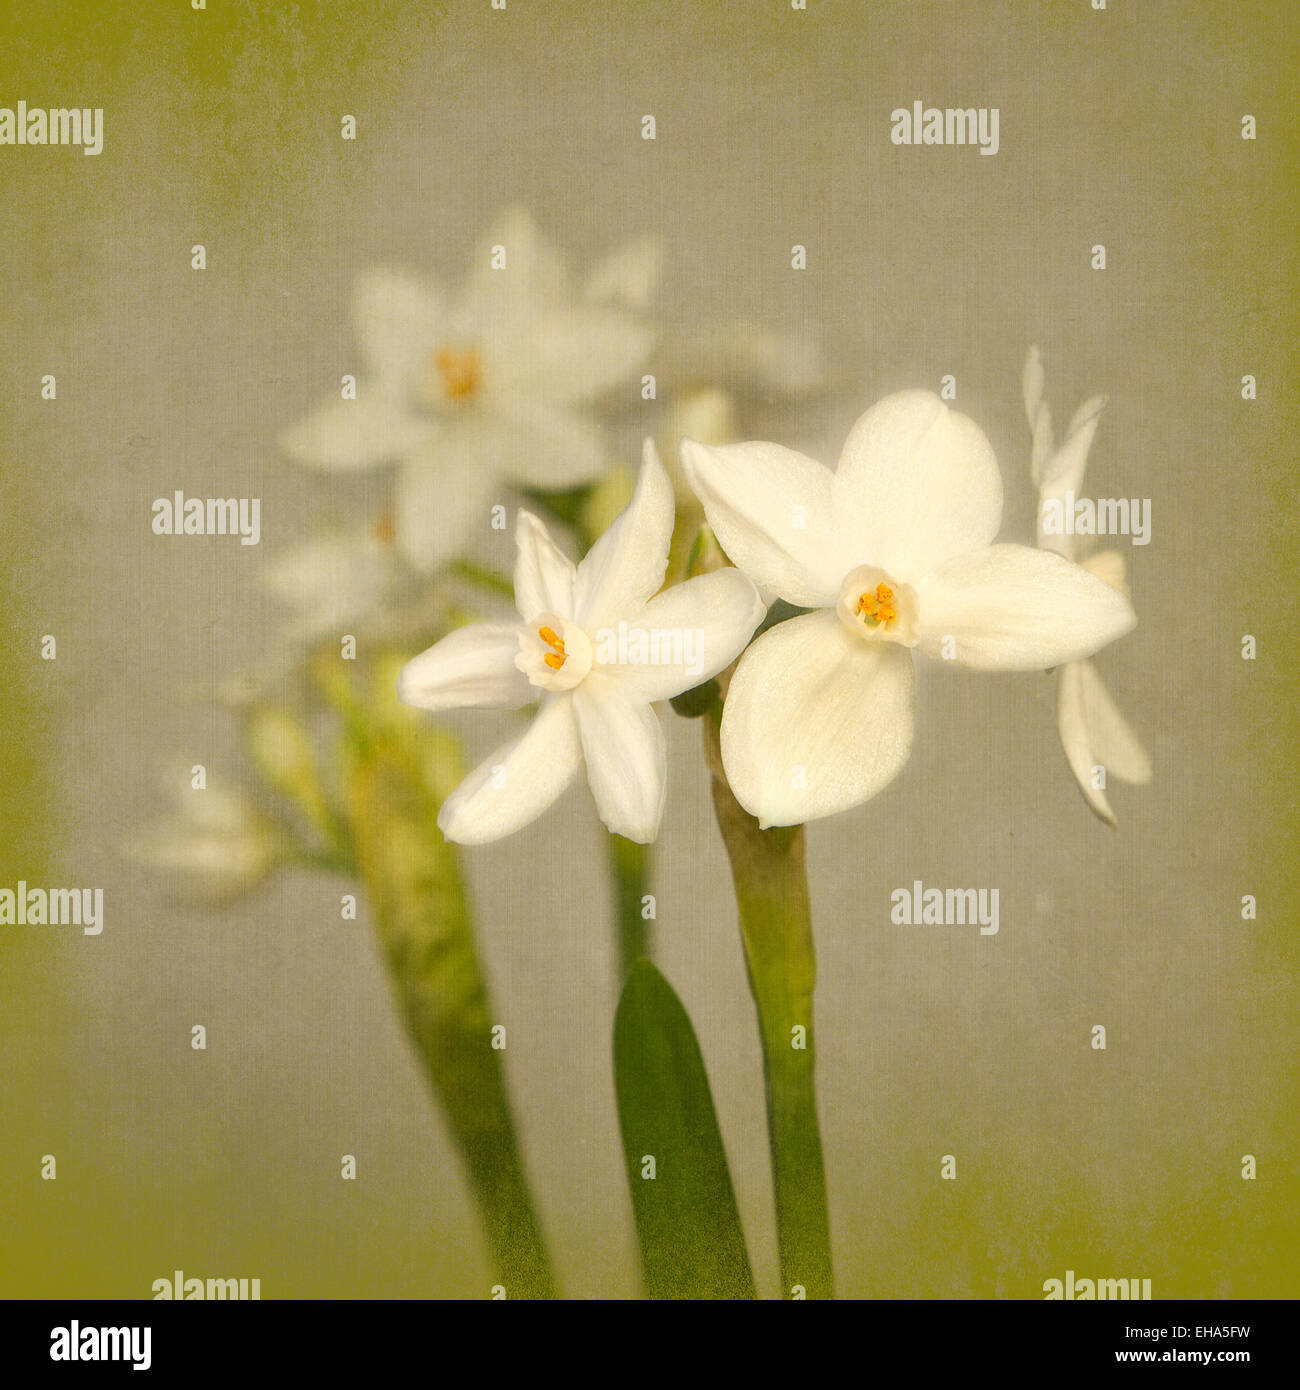 Close-up of flowers of paperwhite narcissi. Stock Photo